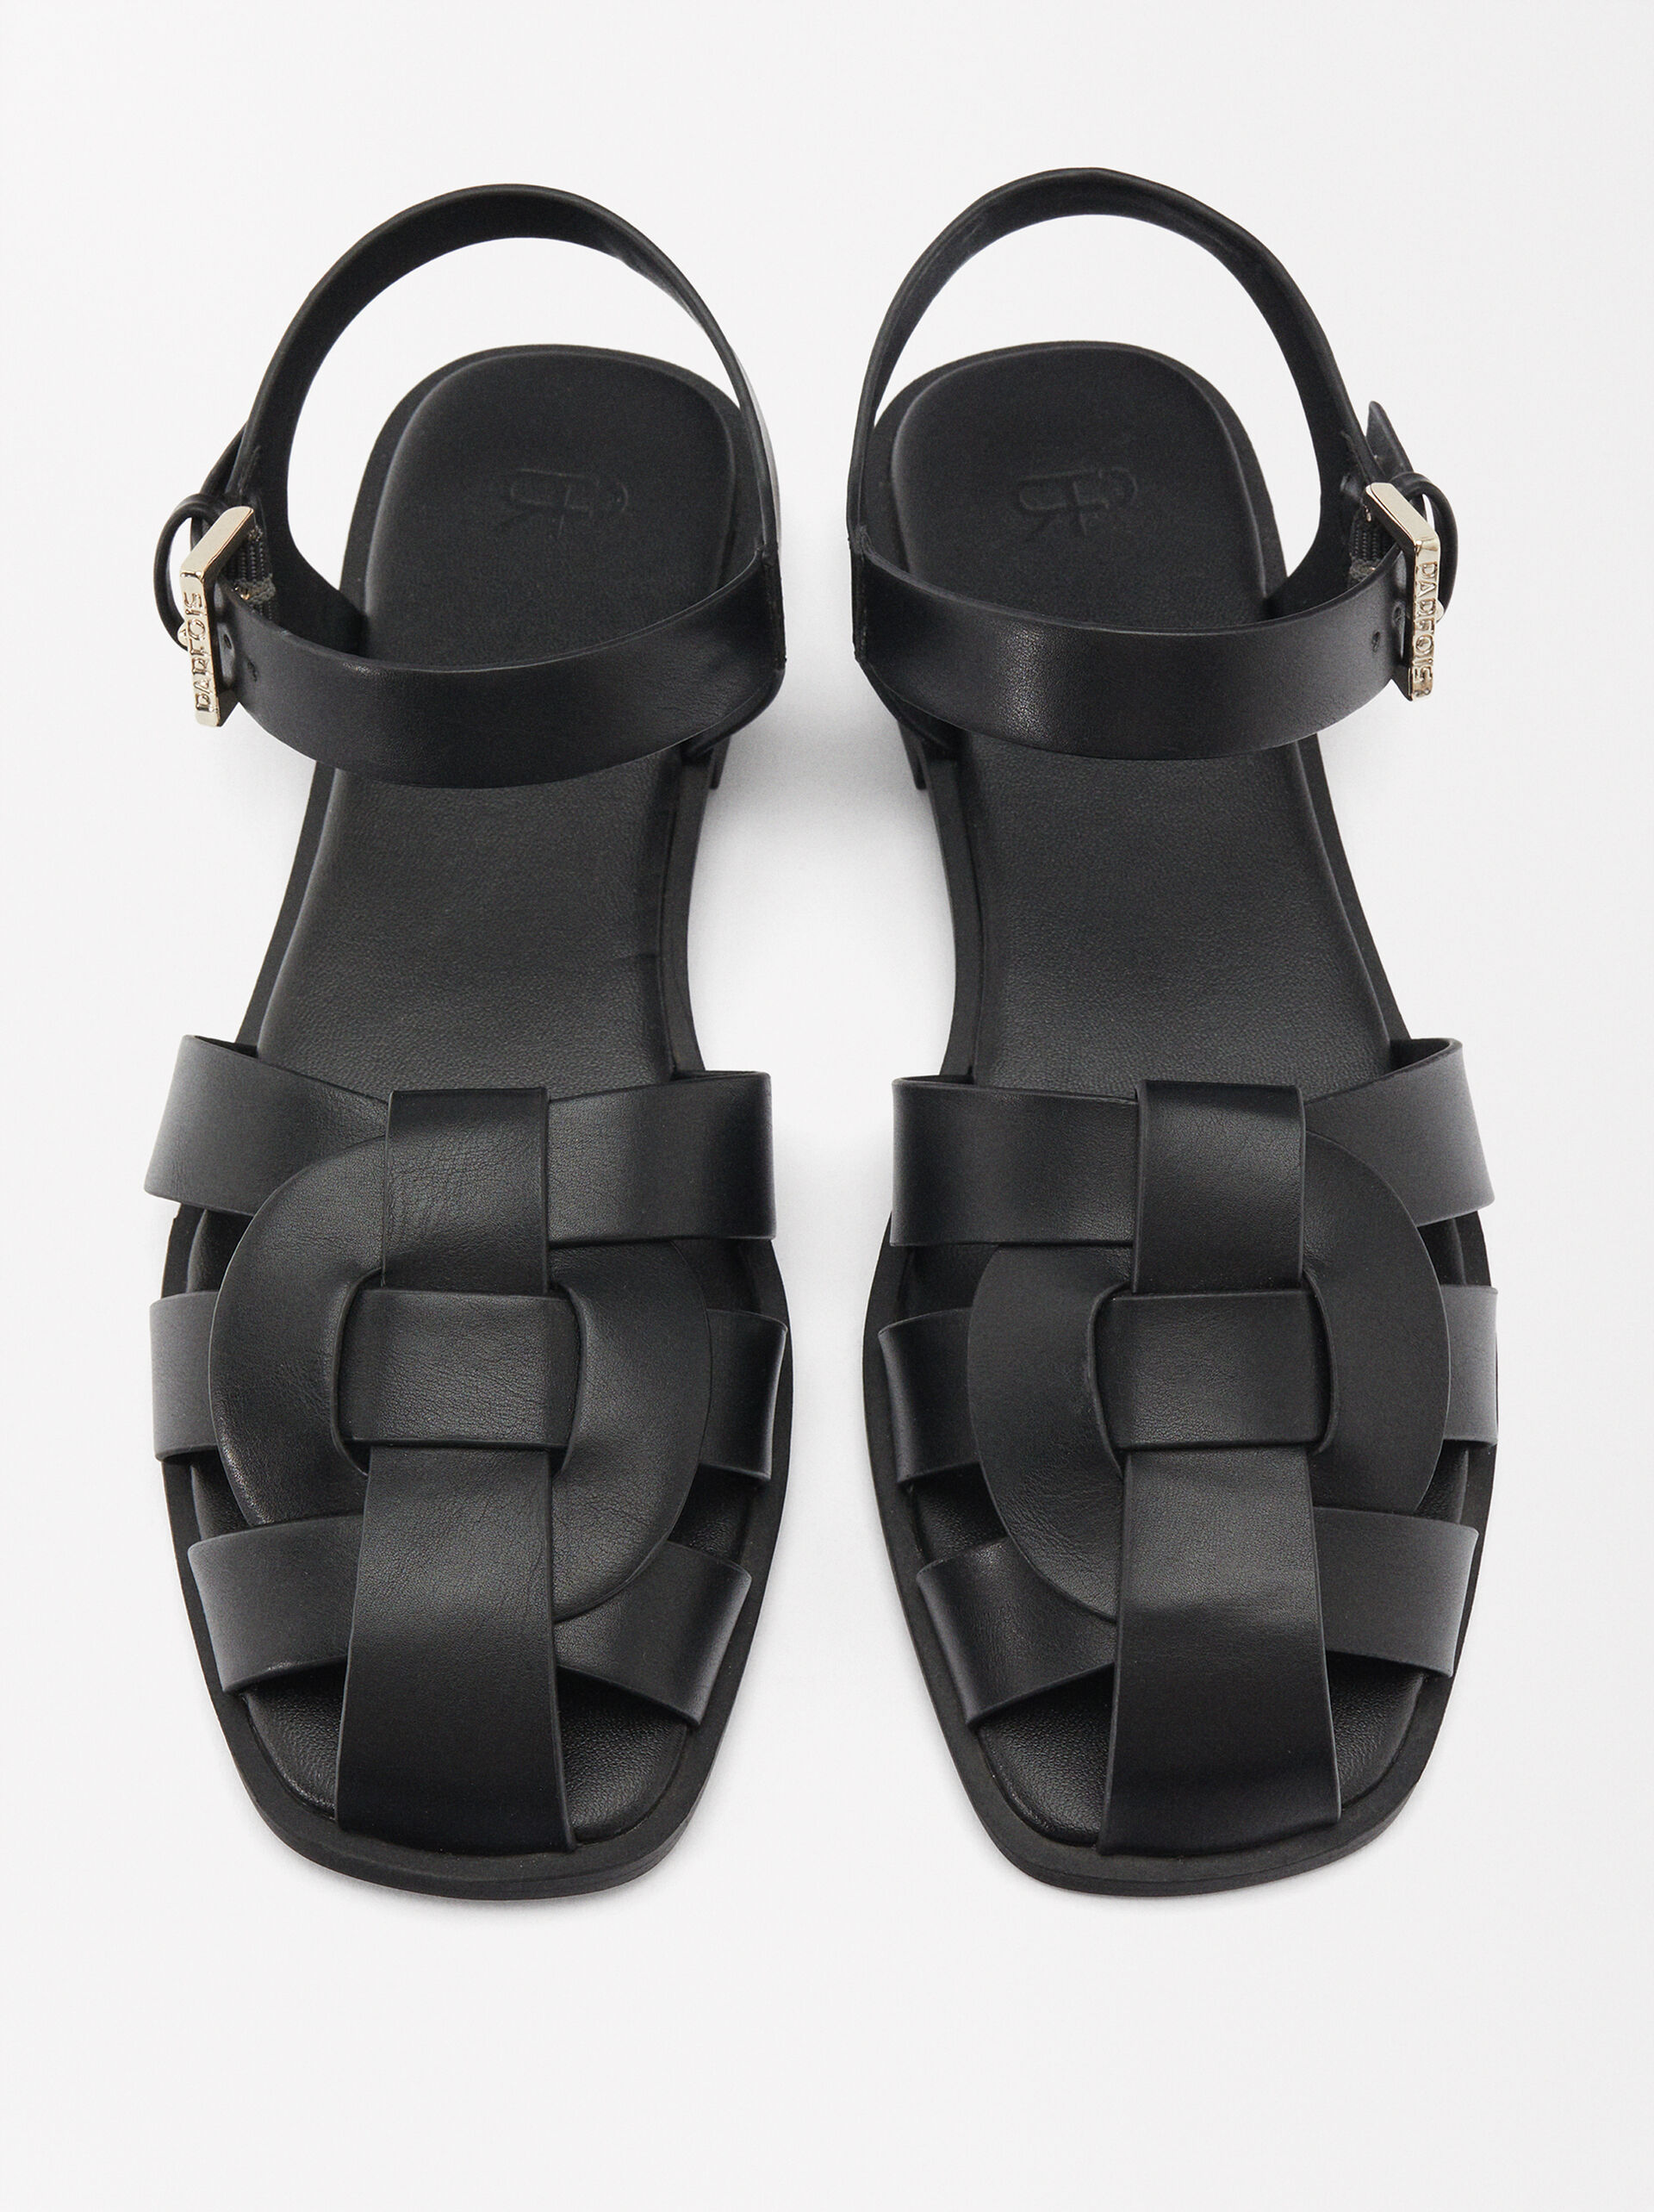 Strappy Sandals image number 0.0